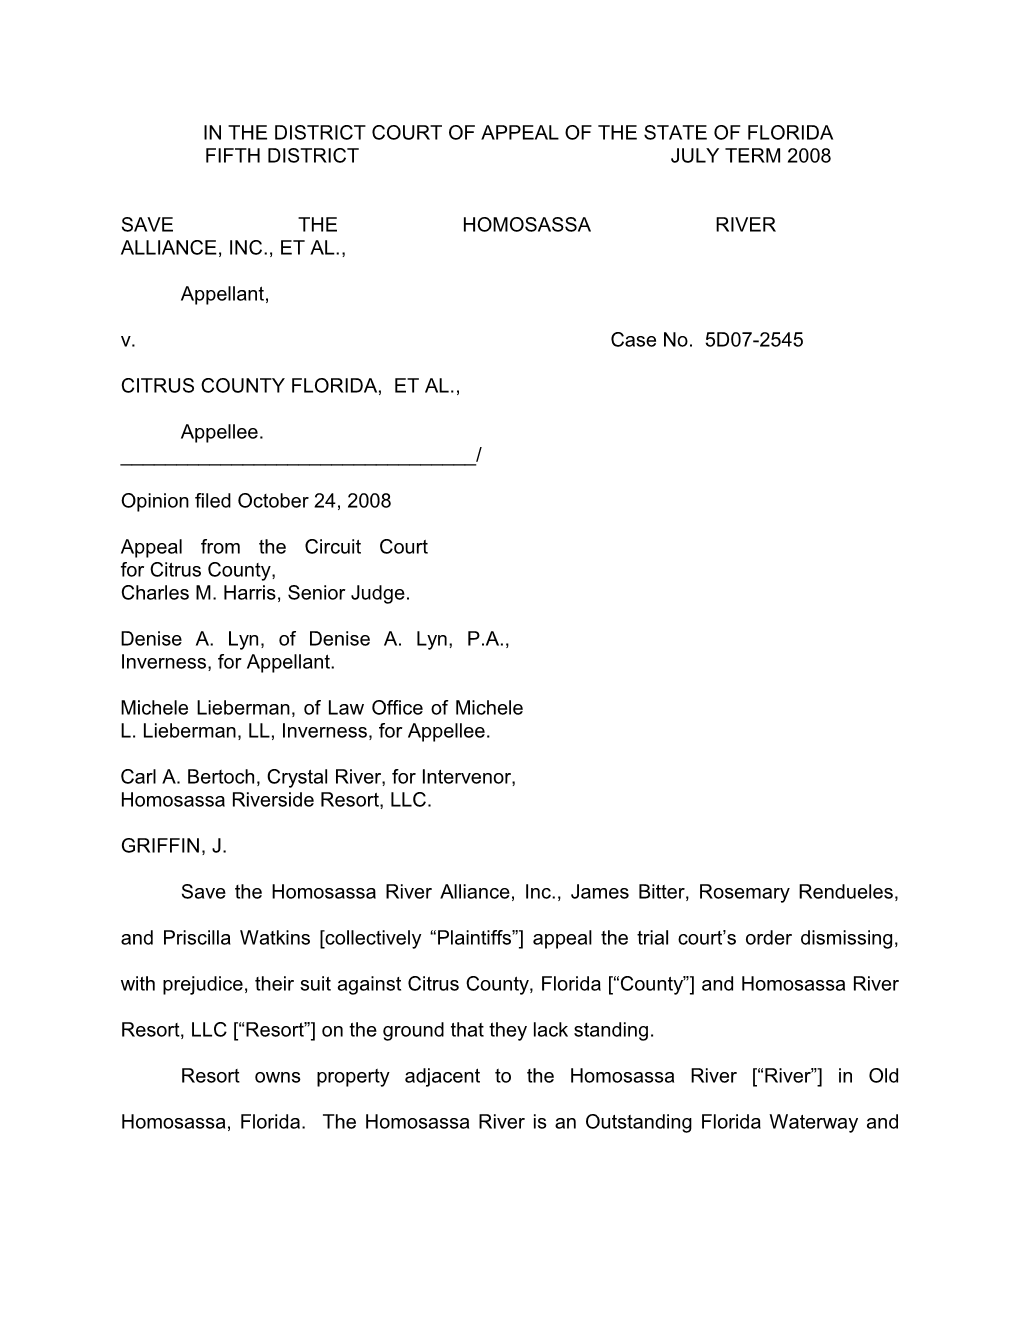 In the District Court of Appeal of the State of Florida s2